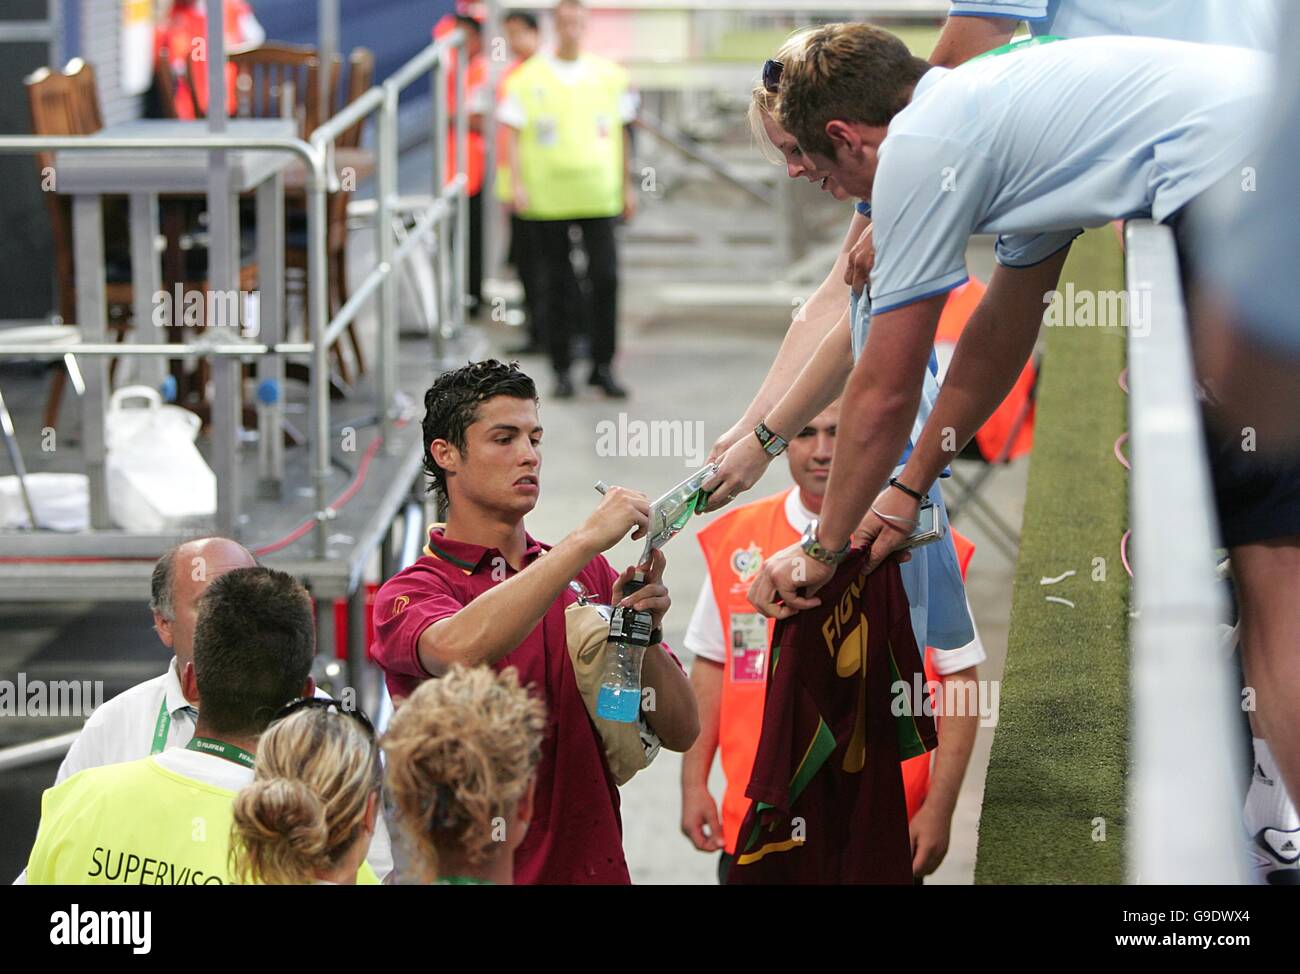 Soccer - 2006 FIFA World Cup Germany - Quarter Final - England v Portugal - AufSchalke Arena. Portugal's Cristiano Ronaldo signs autographs as he leaves the stadium Stock Photo